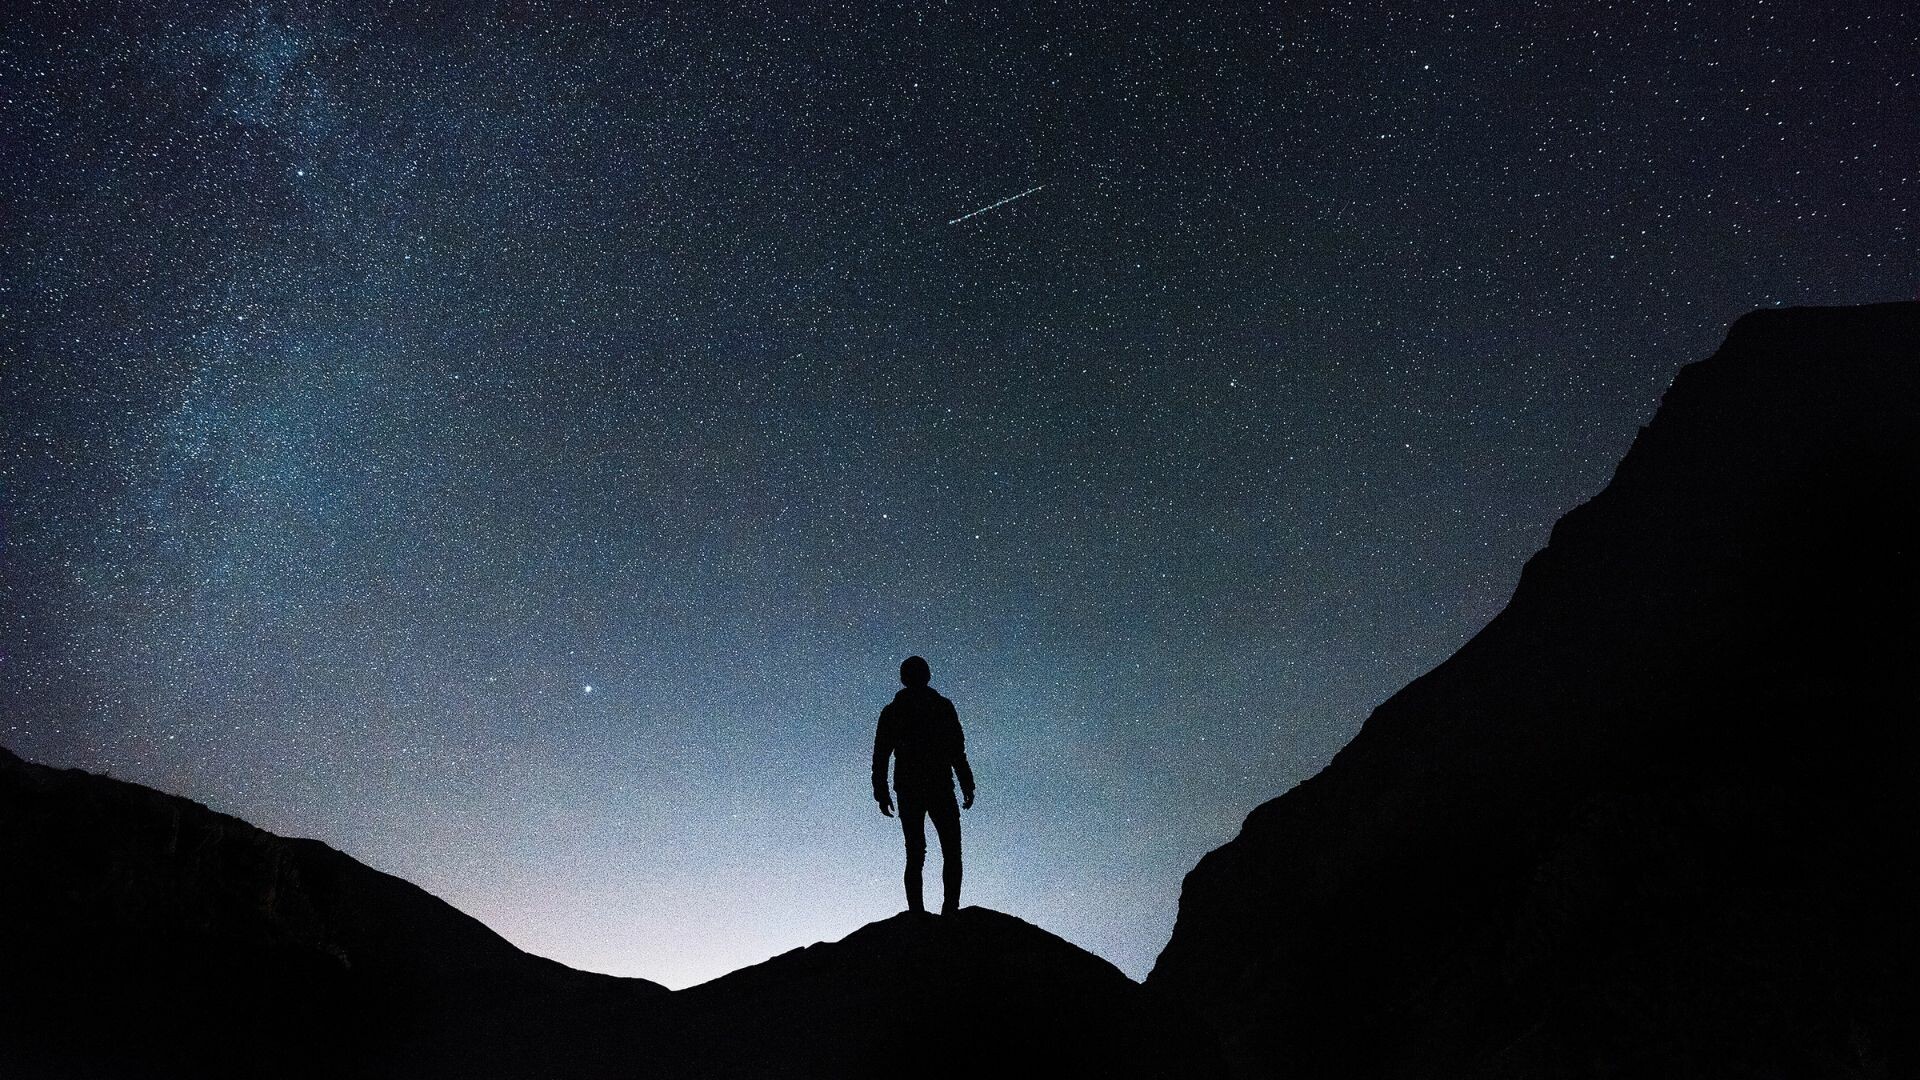 Person looking up at the night sky filled with stars.